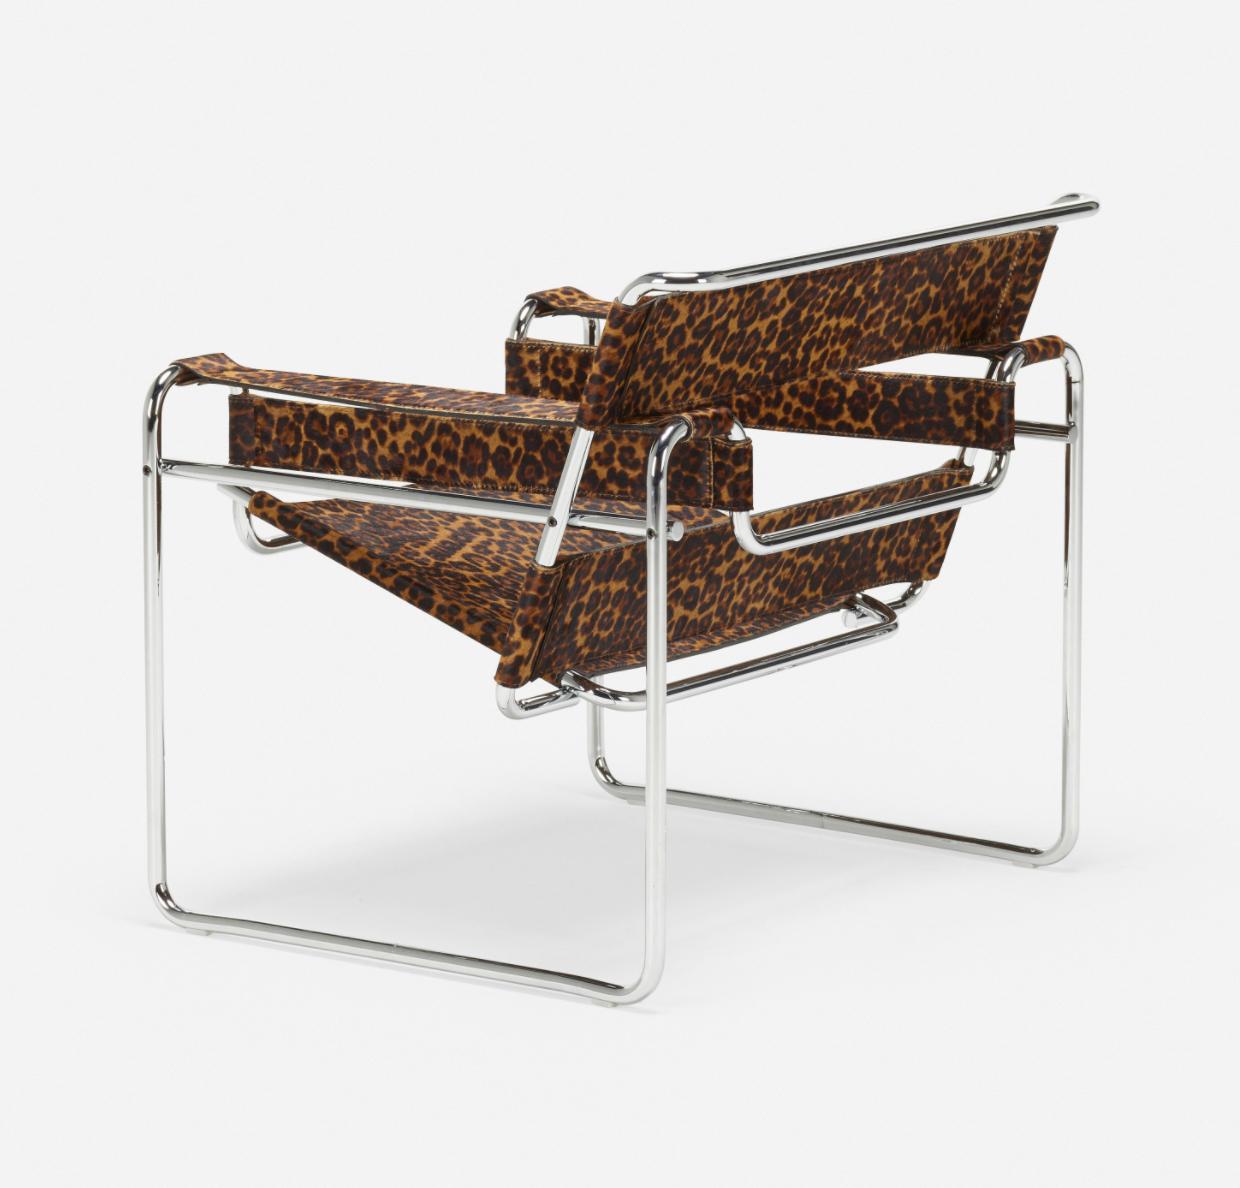 20th Century Knoll x Supreme Leopard Model B3 Wassily Lounge Chair, Marcel Breuer, 1925, 2019